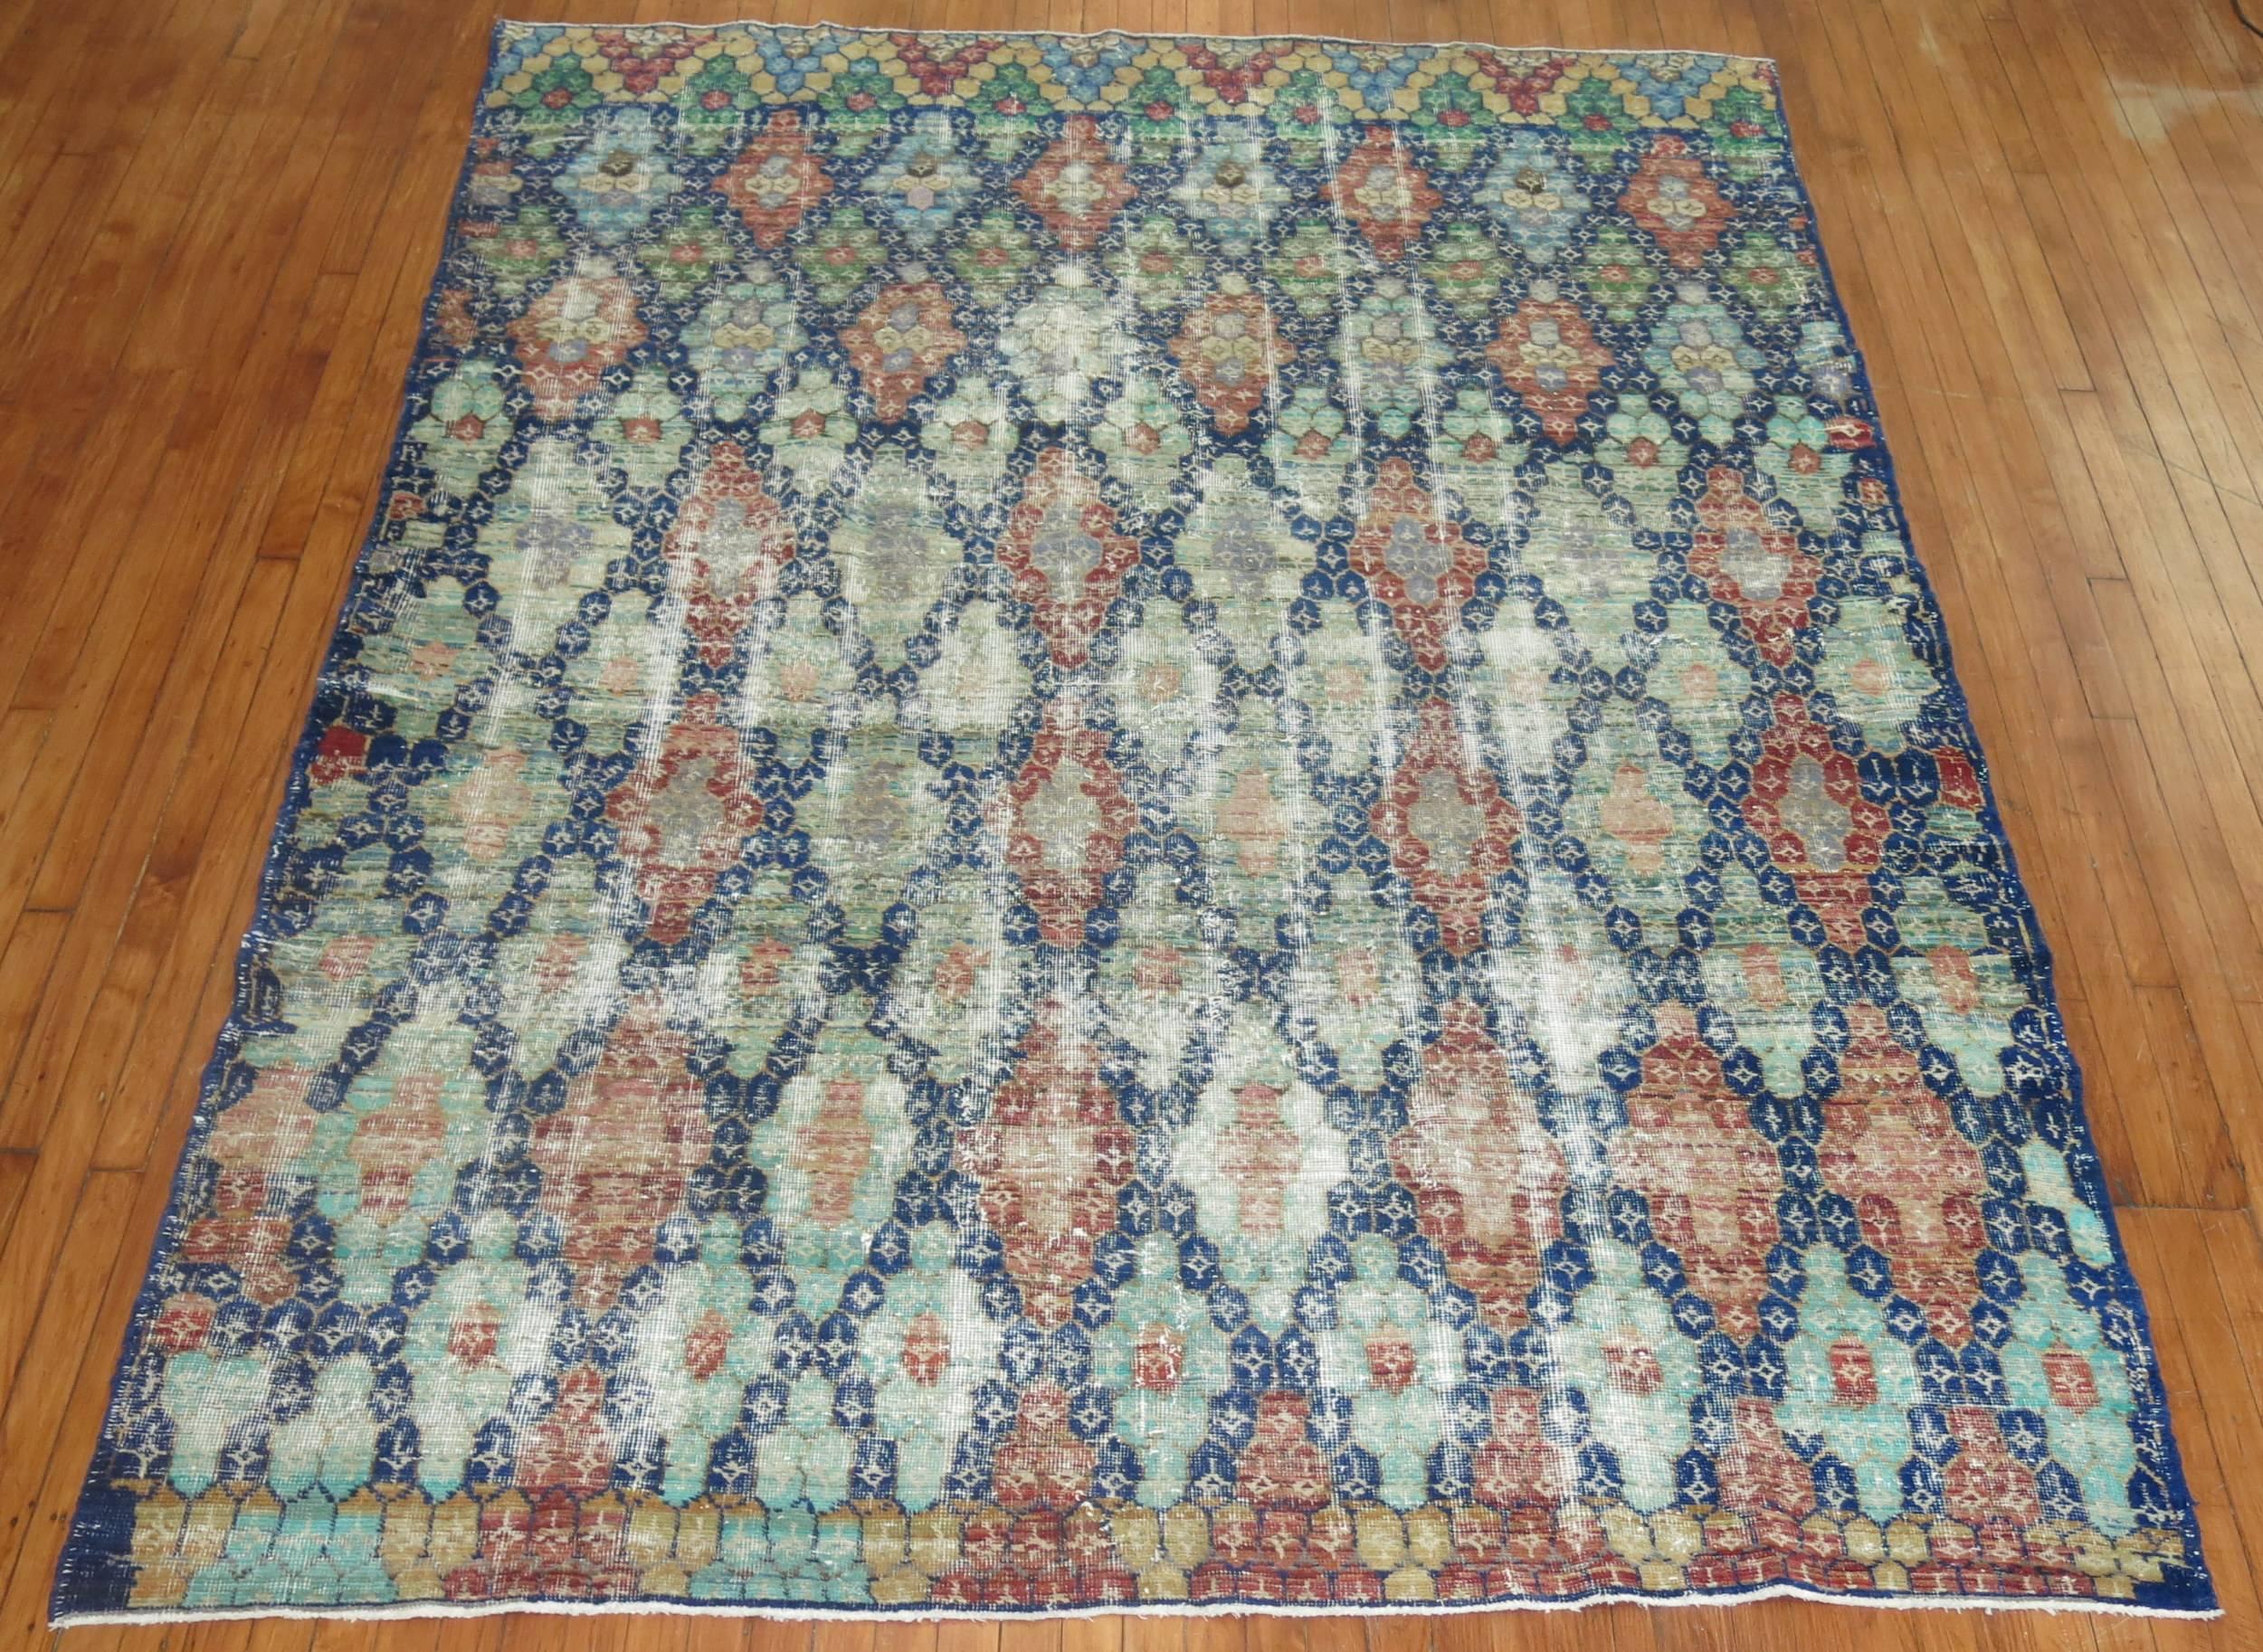 Shabby chic Turkish Anatolian carpet, navy blue field, predominant accents in green, soft red, soft orange, blue and gray.

6'11' x 9'8''